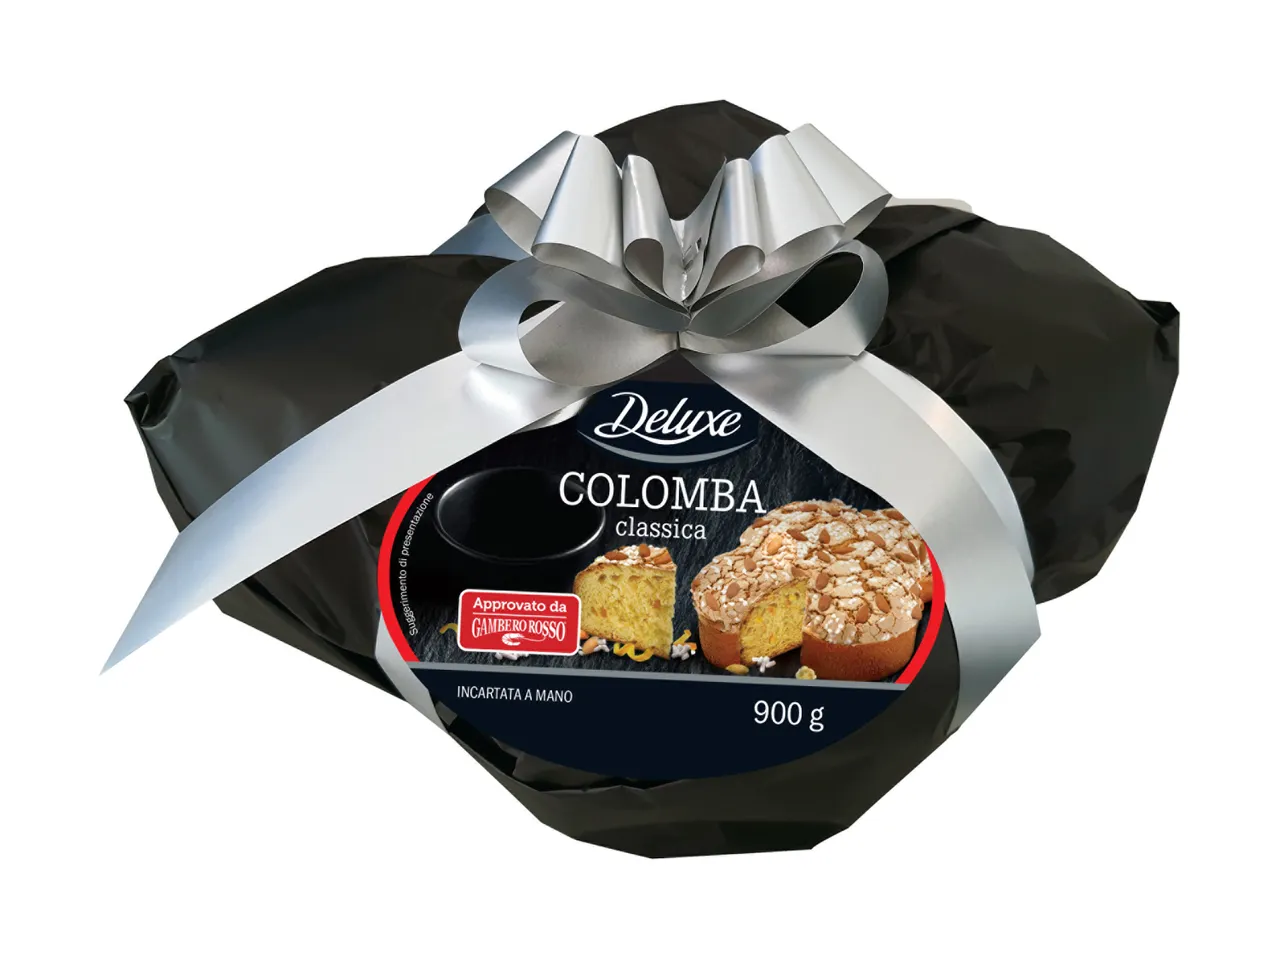 Lidl colomba Deluxe